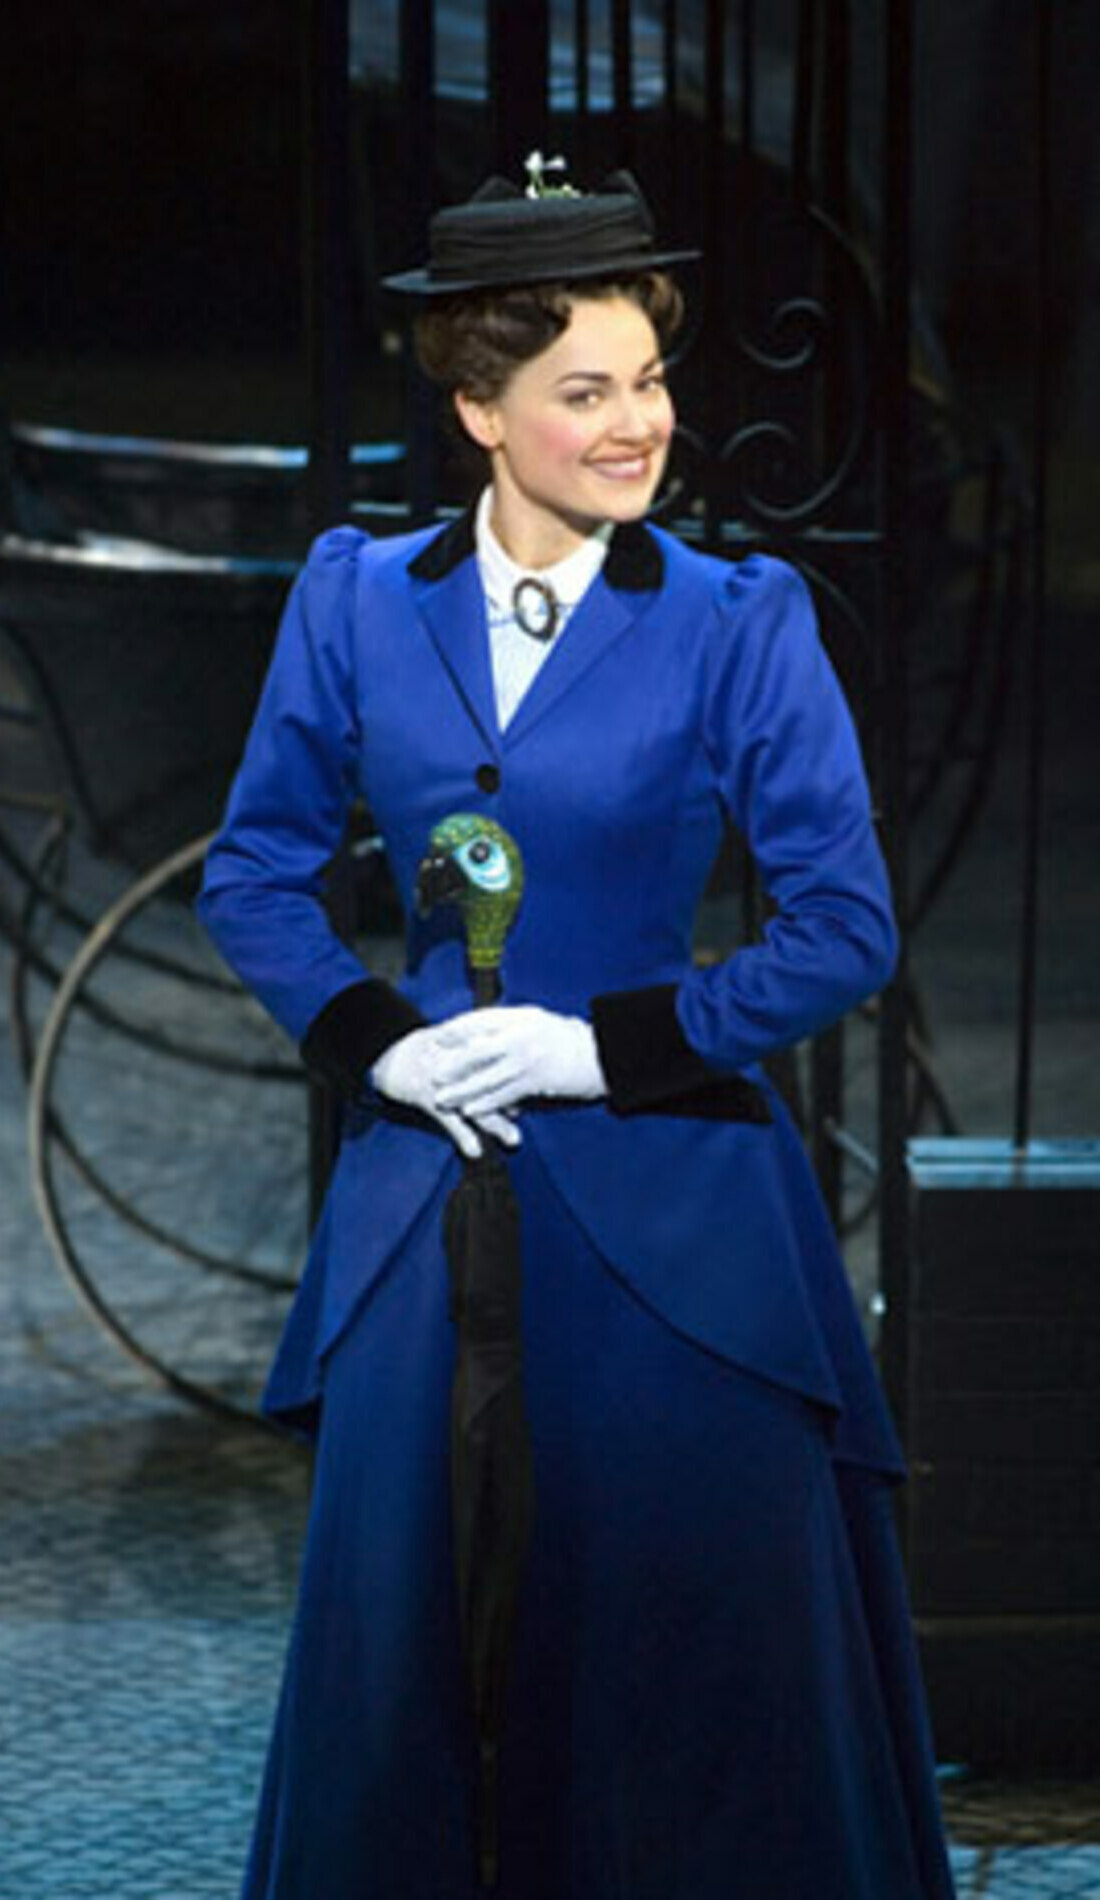 A Mary Poppins live event